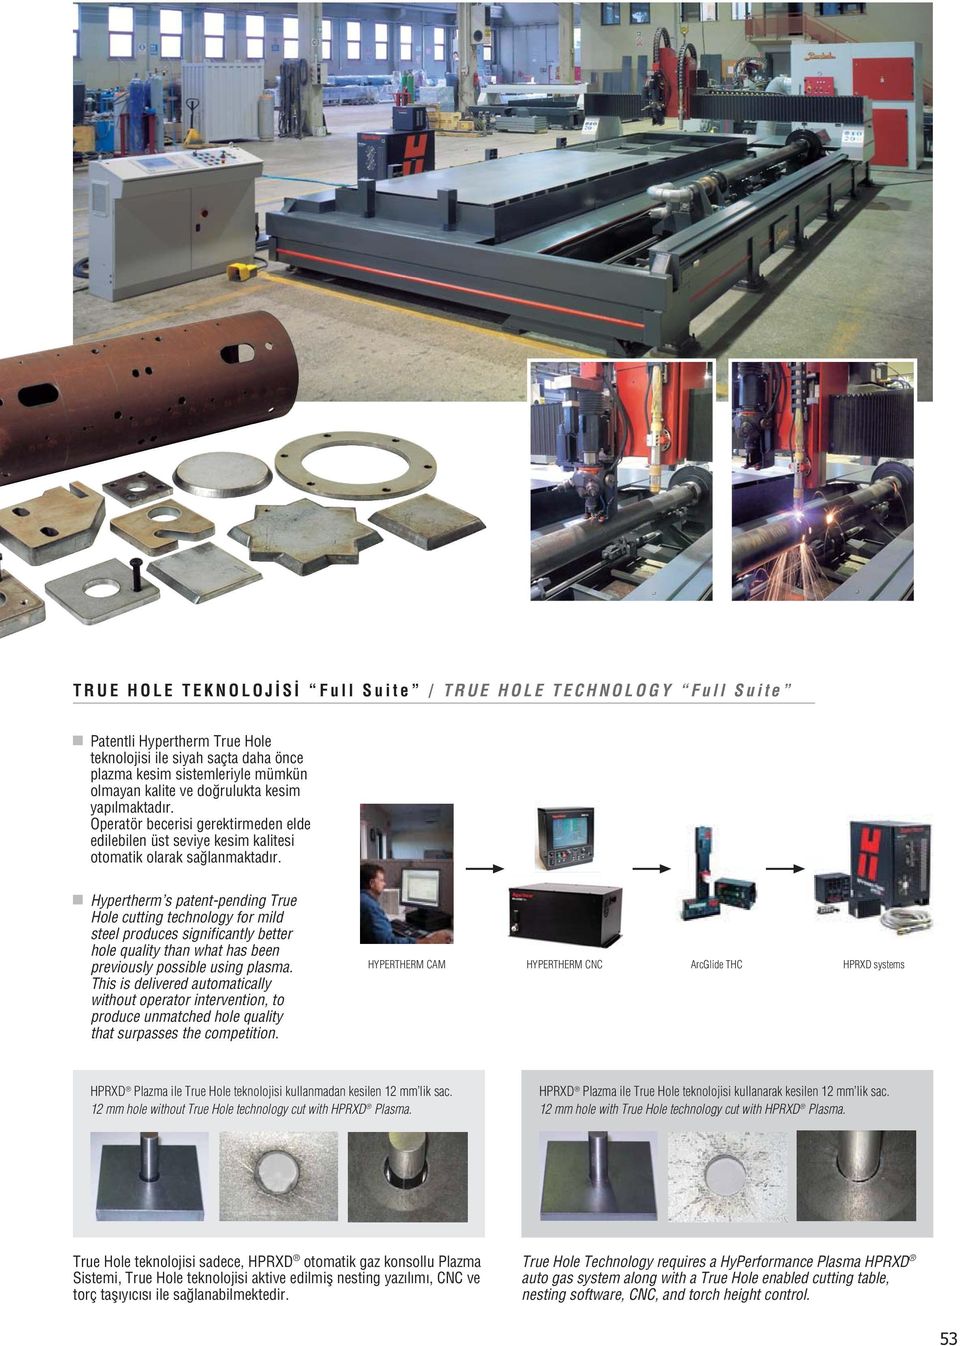 Hypertherm s patent-pending True Hole cutting technology for mild steel produces significantly better hole quality than what has been previously possible using plasma.